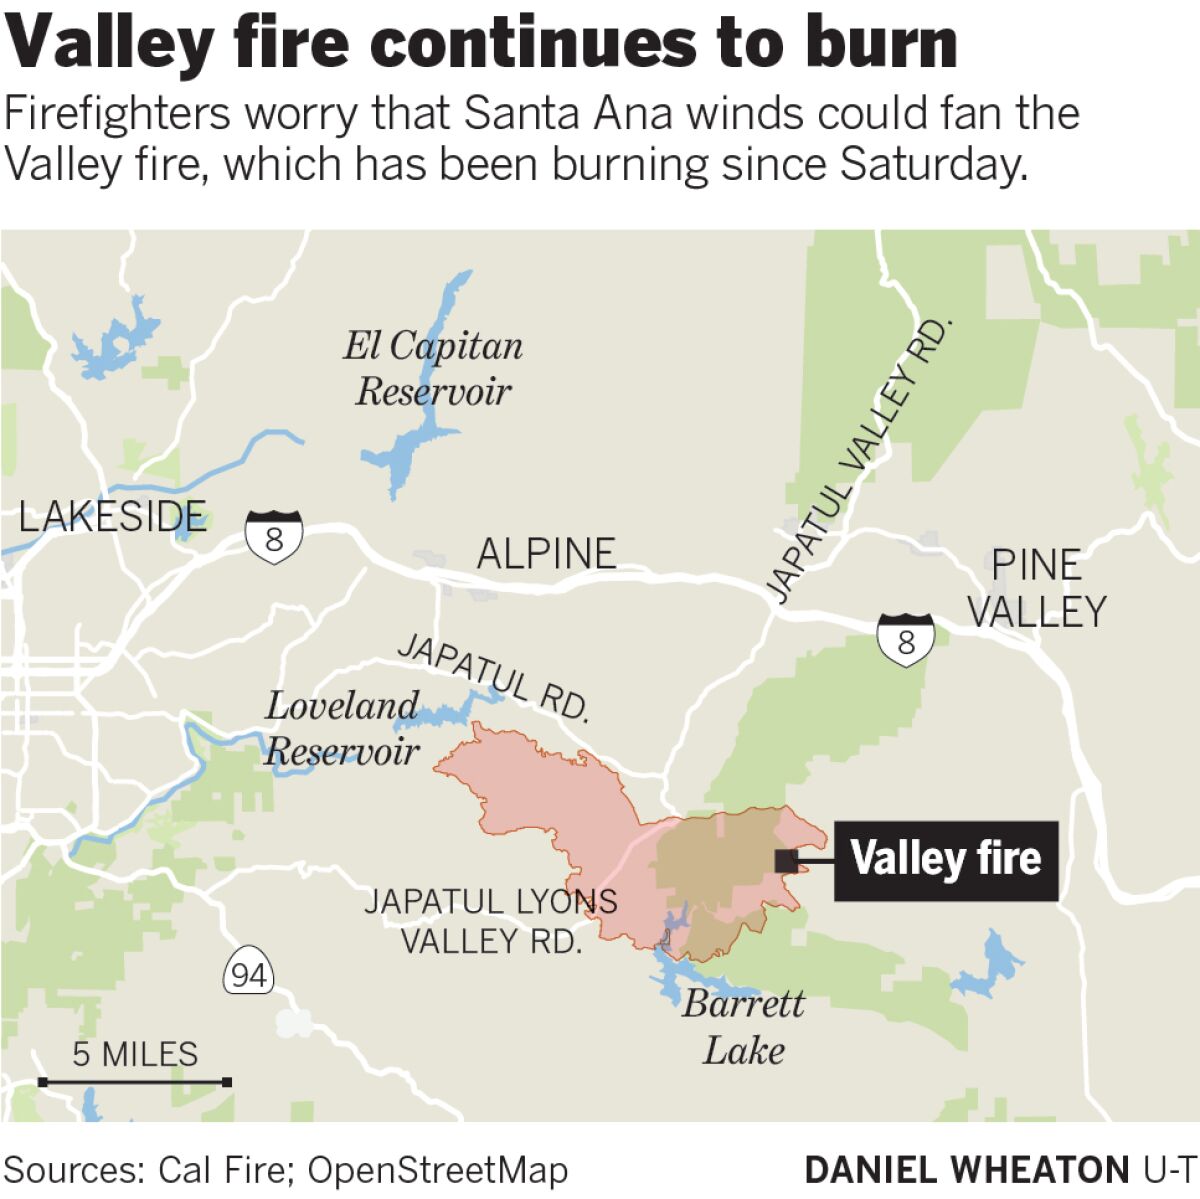 Valley fire continues to burn